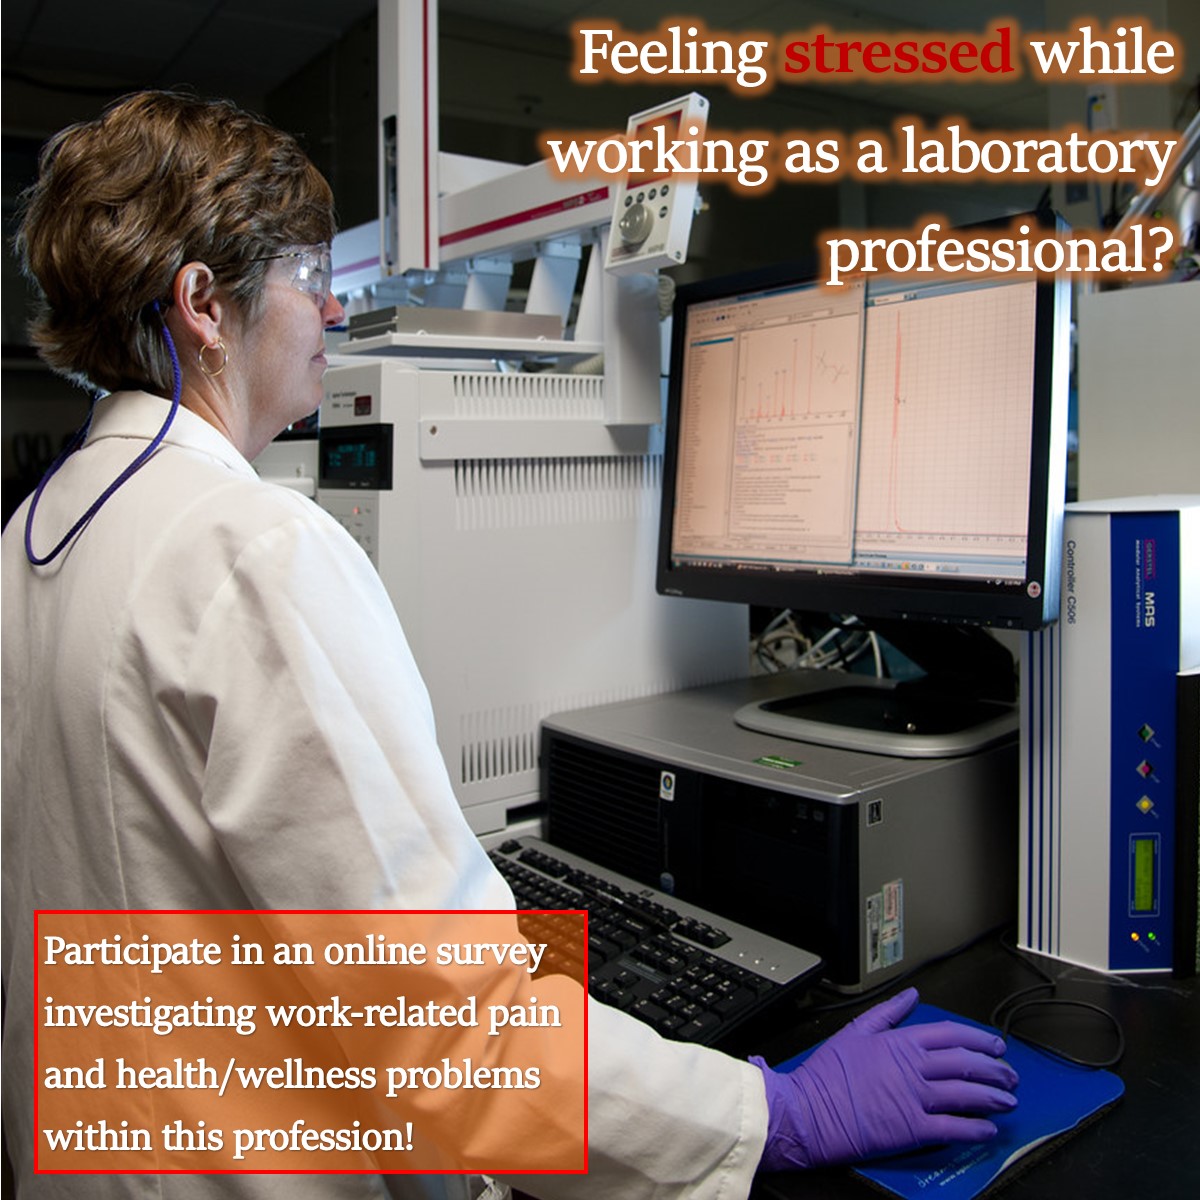 📢Calling #LabProfessionals A study on Work-related Exposures and Occupational Health Burdens on Laboratory Professionals is open to all qualifying individuals. Help us understand the impact of burnout. Follow this link to participate: redcap.kumc.edu/surveys/?s=A9M… Qs?➡DM #TWH